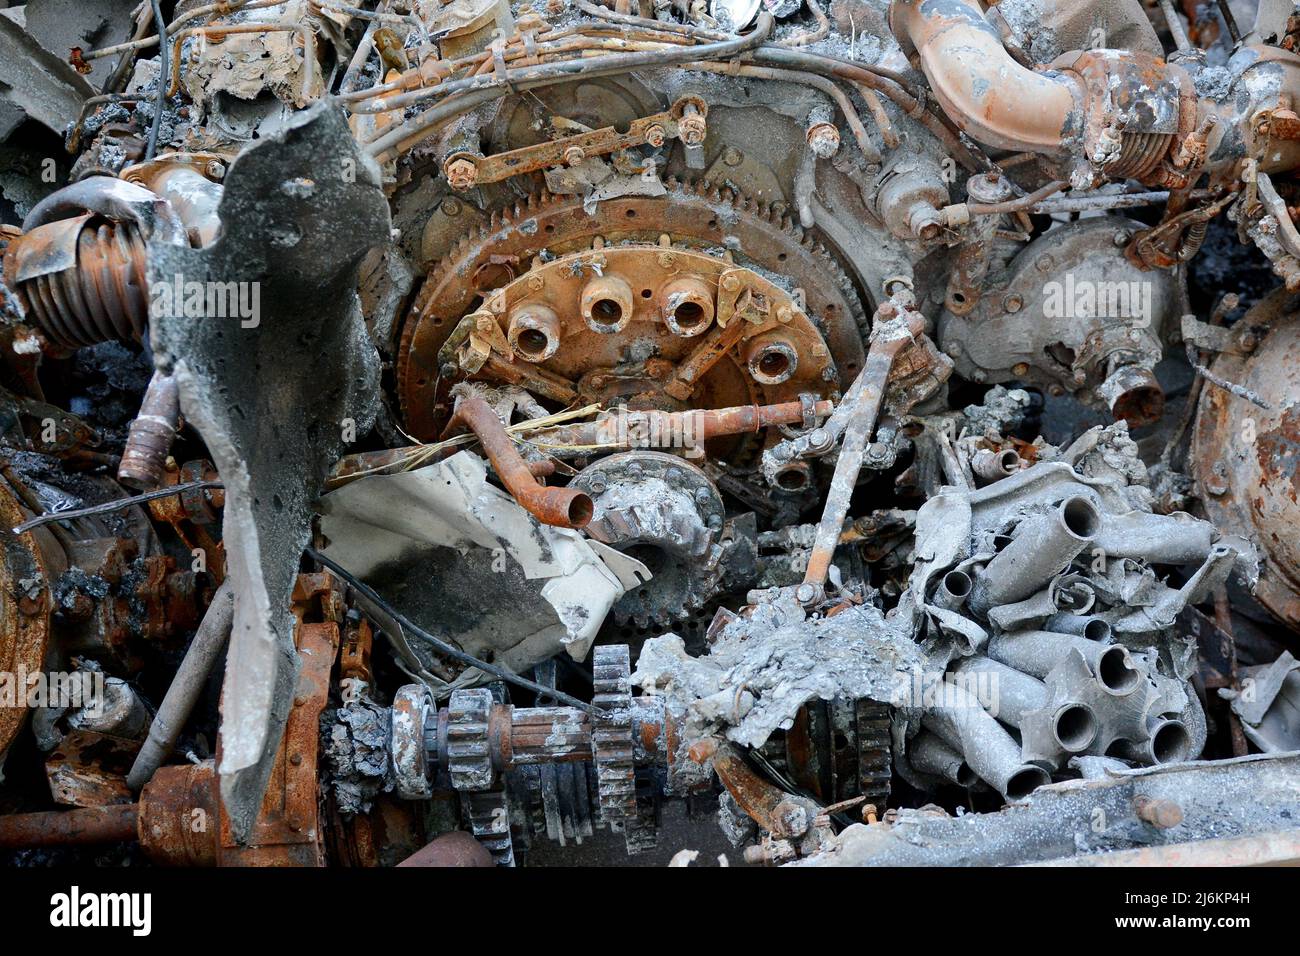 Kyiv region, Ukraine - 02 May 2022, Close-up of the engine of a destroyed Russian tank parked on the roadside, it was destroyed by the Ukrainian military in the Kiev region. Russia invaded Ukraine on 24 February 2022, triggering the largest military attack in Europe since World War II. Stock Photo